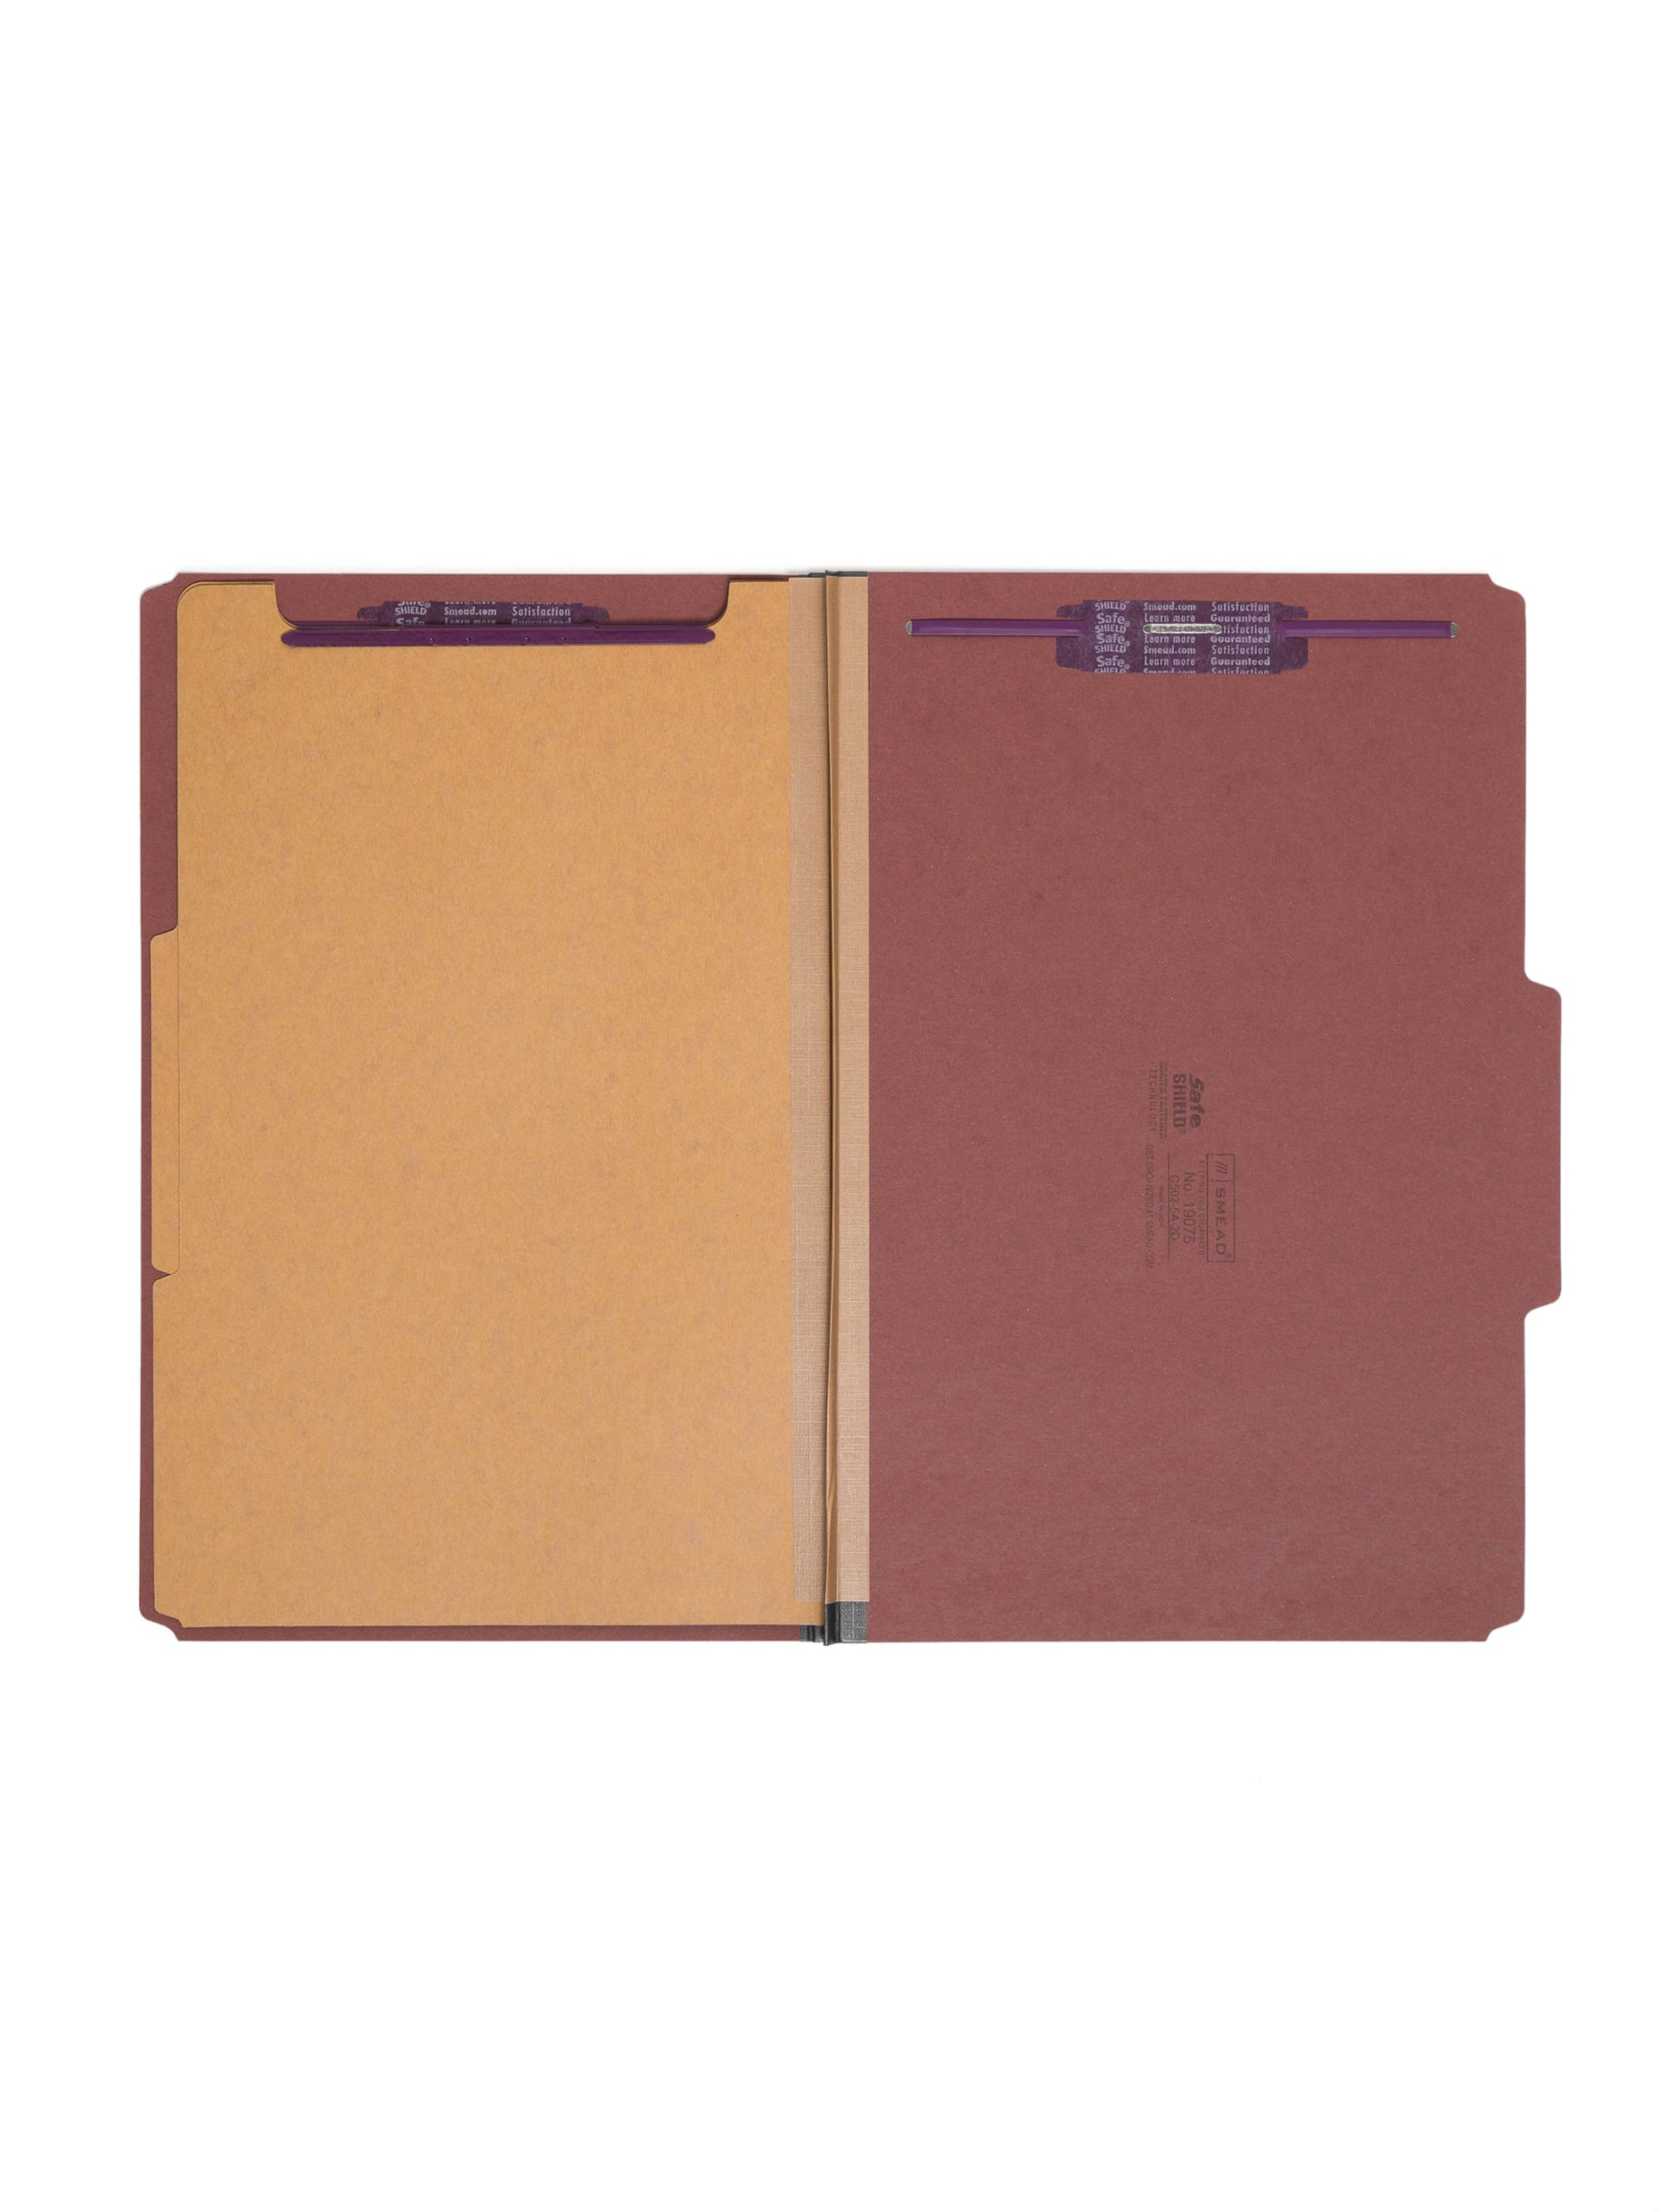 SafeSHIELD® Pressboard Classification File Folders, 2 Dividers, 2 inch Expansion, 2/5-Cut Tab, Red Color, Legal Size, Set of 0, 30086486190757